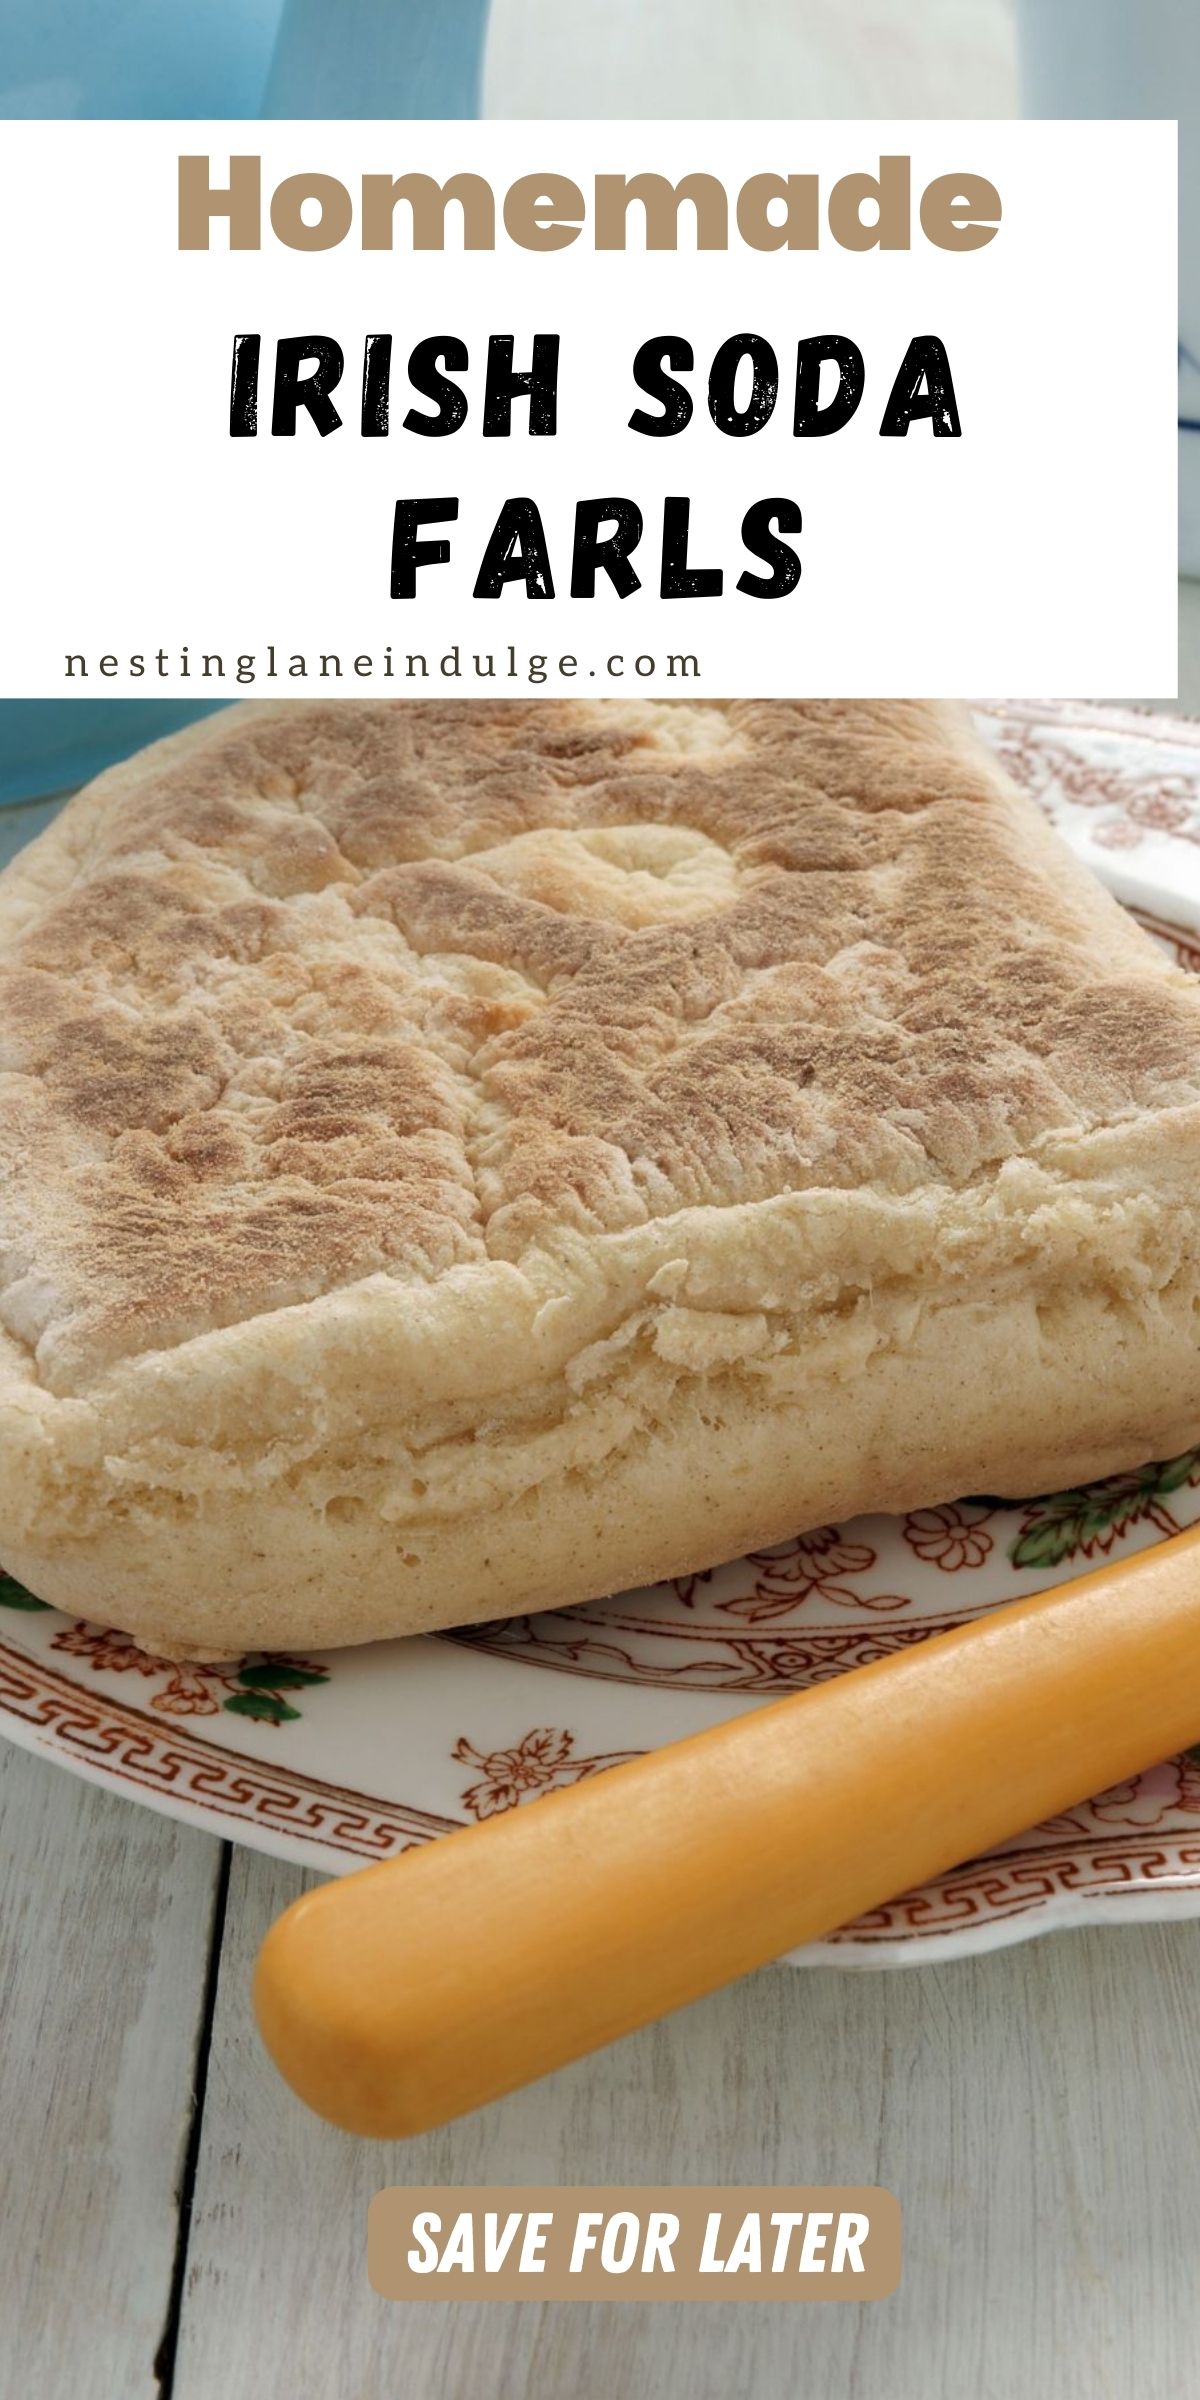 Homemade Irish Soda Farls on a patterned plate with a rolling pin on the side and the text 'Save for Later' on a wooden background.